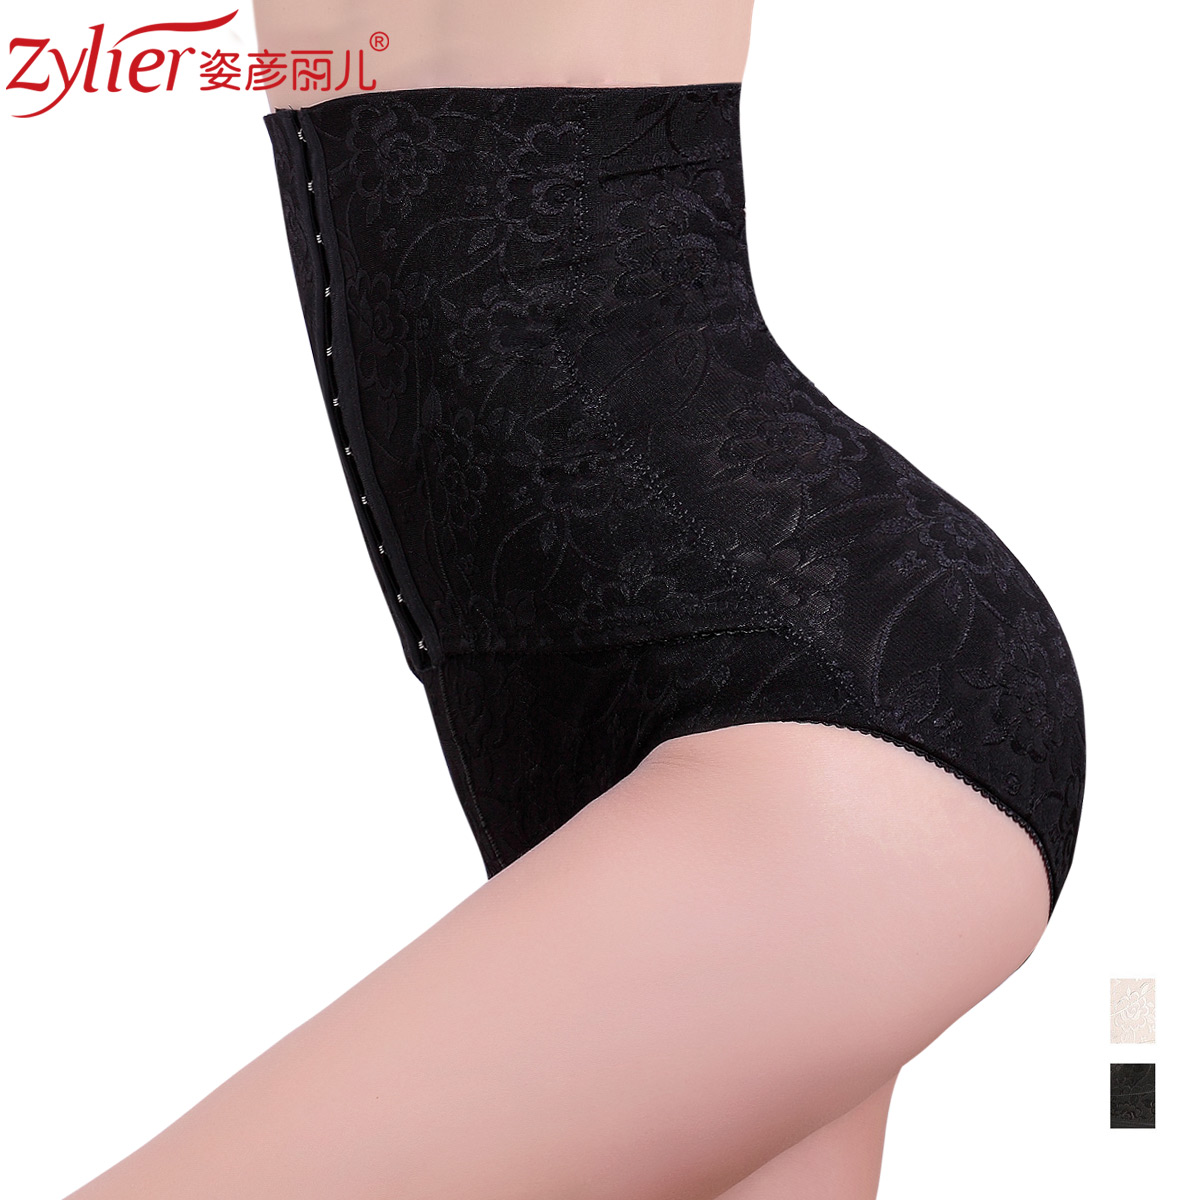 Magnetic temptation of double abdomen drawing magnetic therapy high waist butt-lifting abdomen drawing pants body shaping